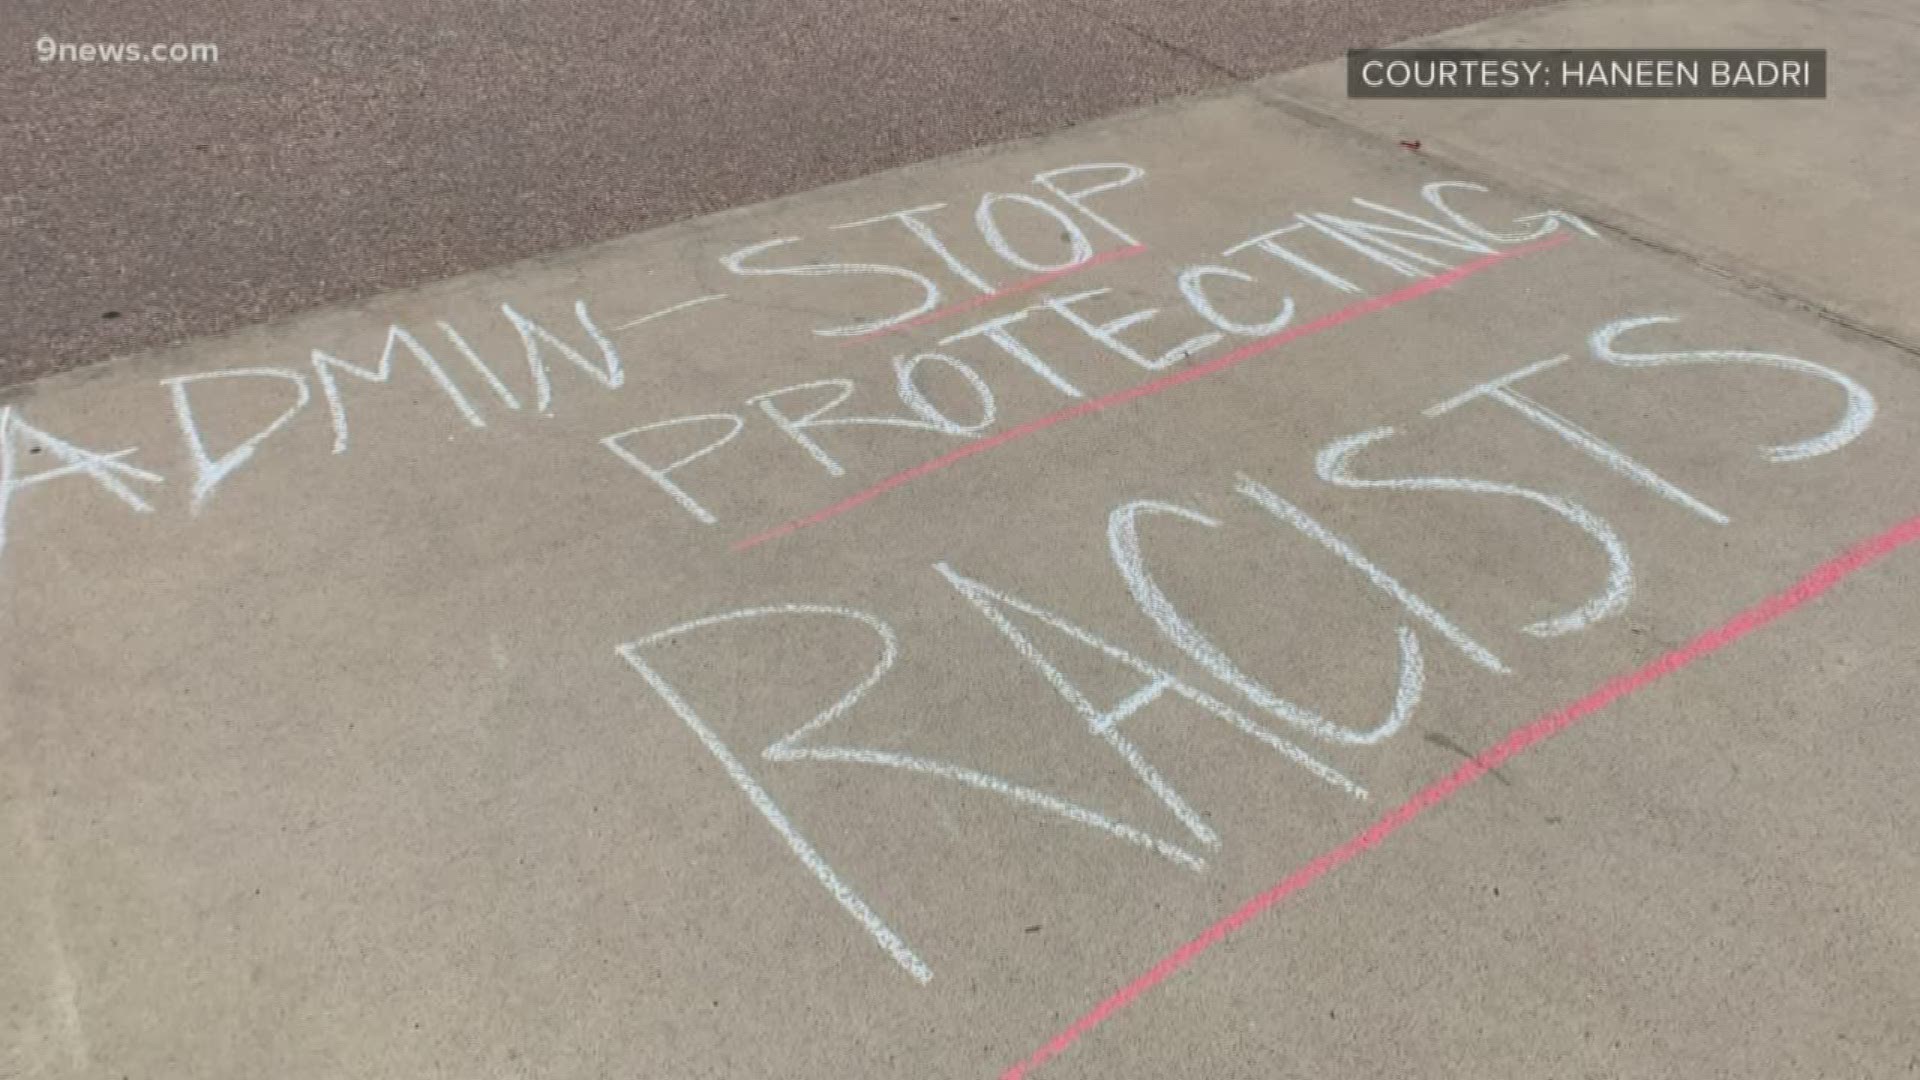 CSU has called out the social media post but, according to some students, it's not enough.